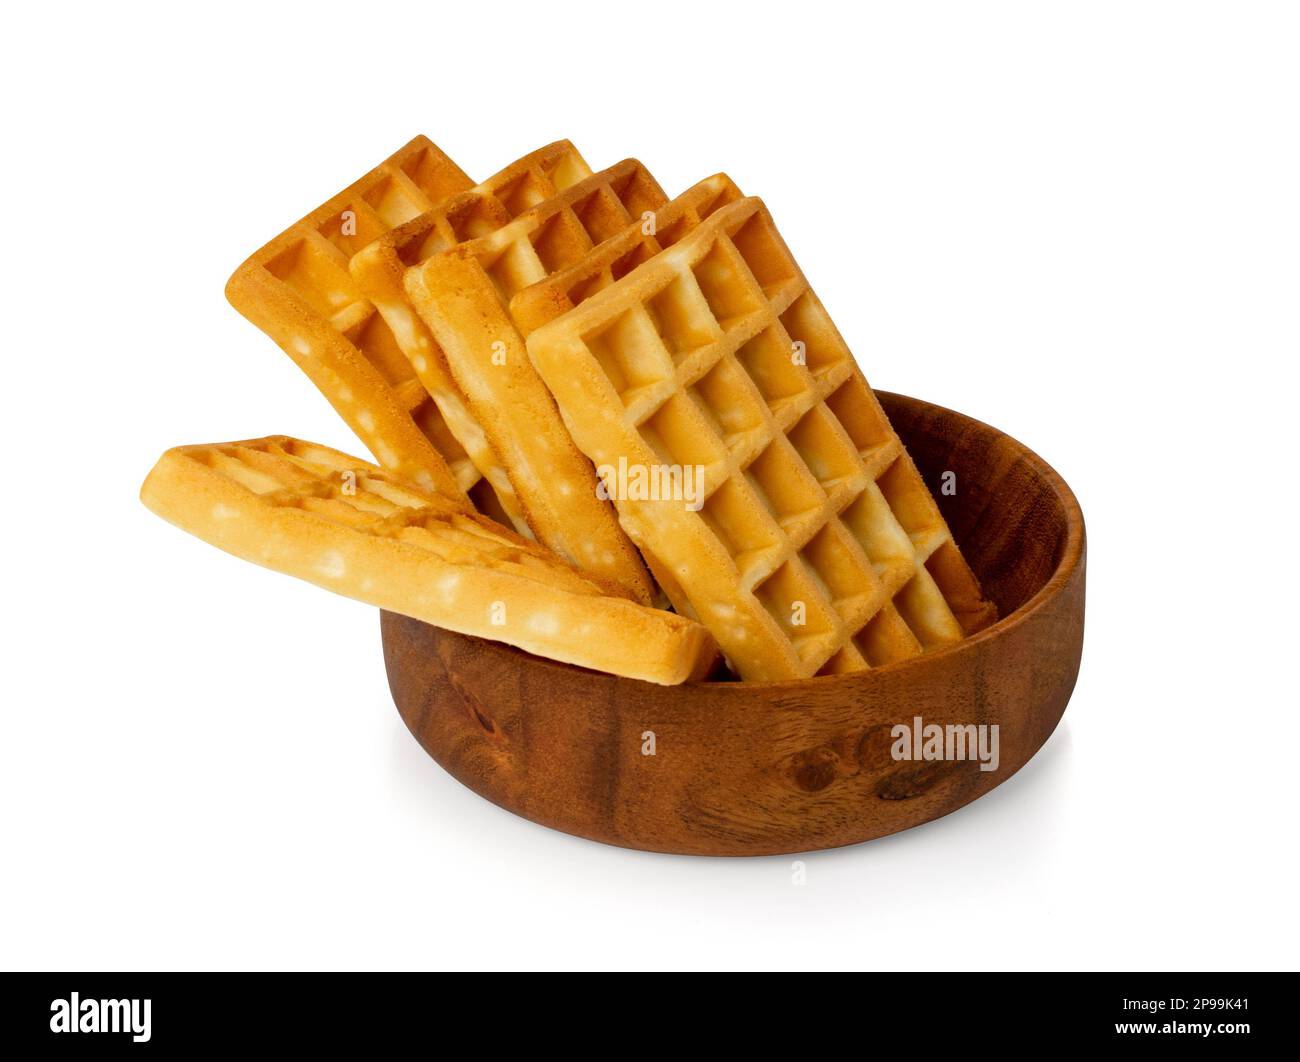 Belgian Waffle Isolated, Square Waffled Cookie in Wood Bowl, Homemade Soft Golden Belgium Waffles, Wafer Biscuit Breakfast on White Background Side Vi Stock Photo